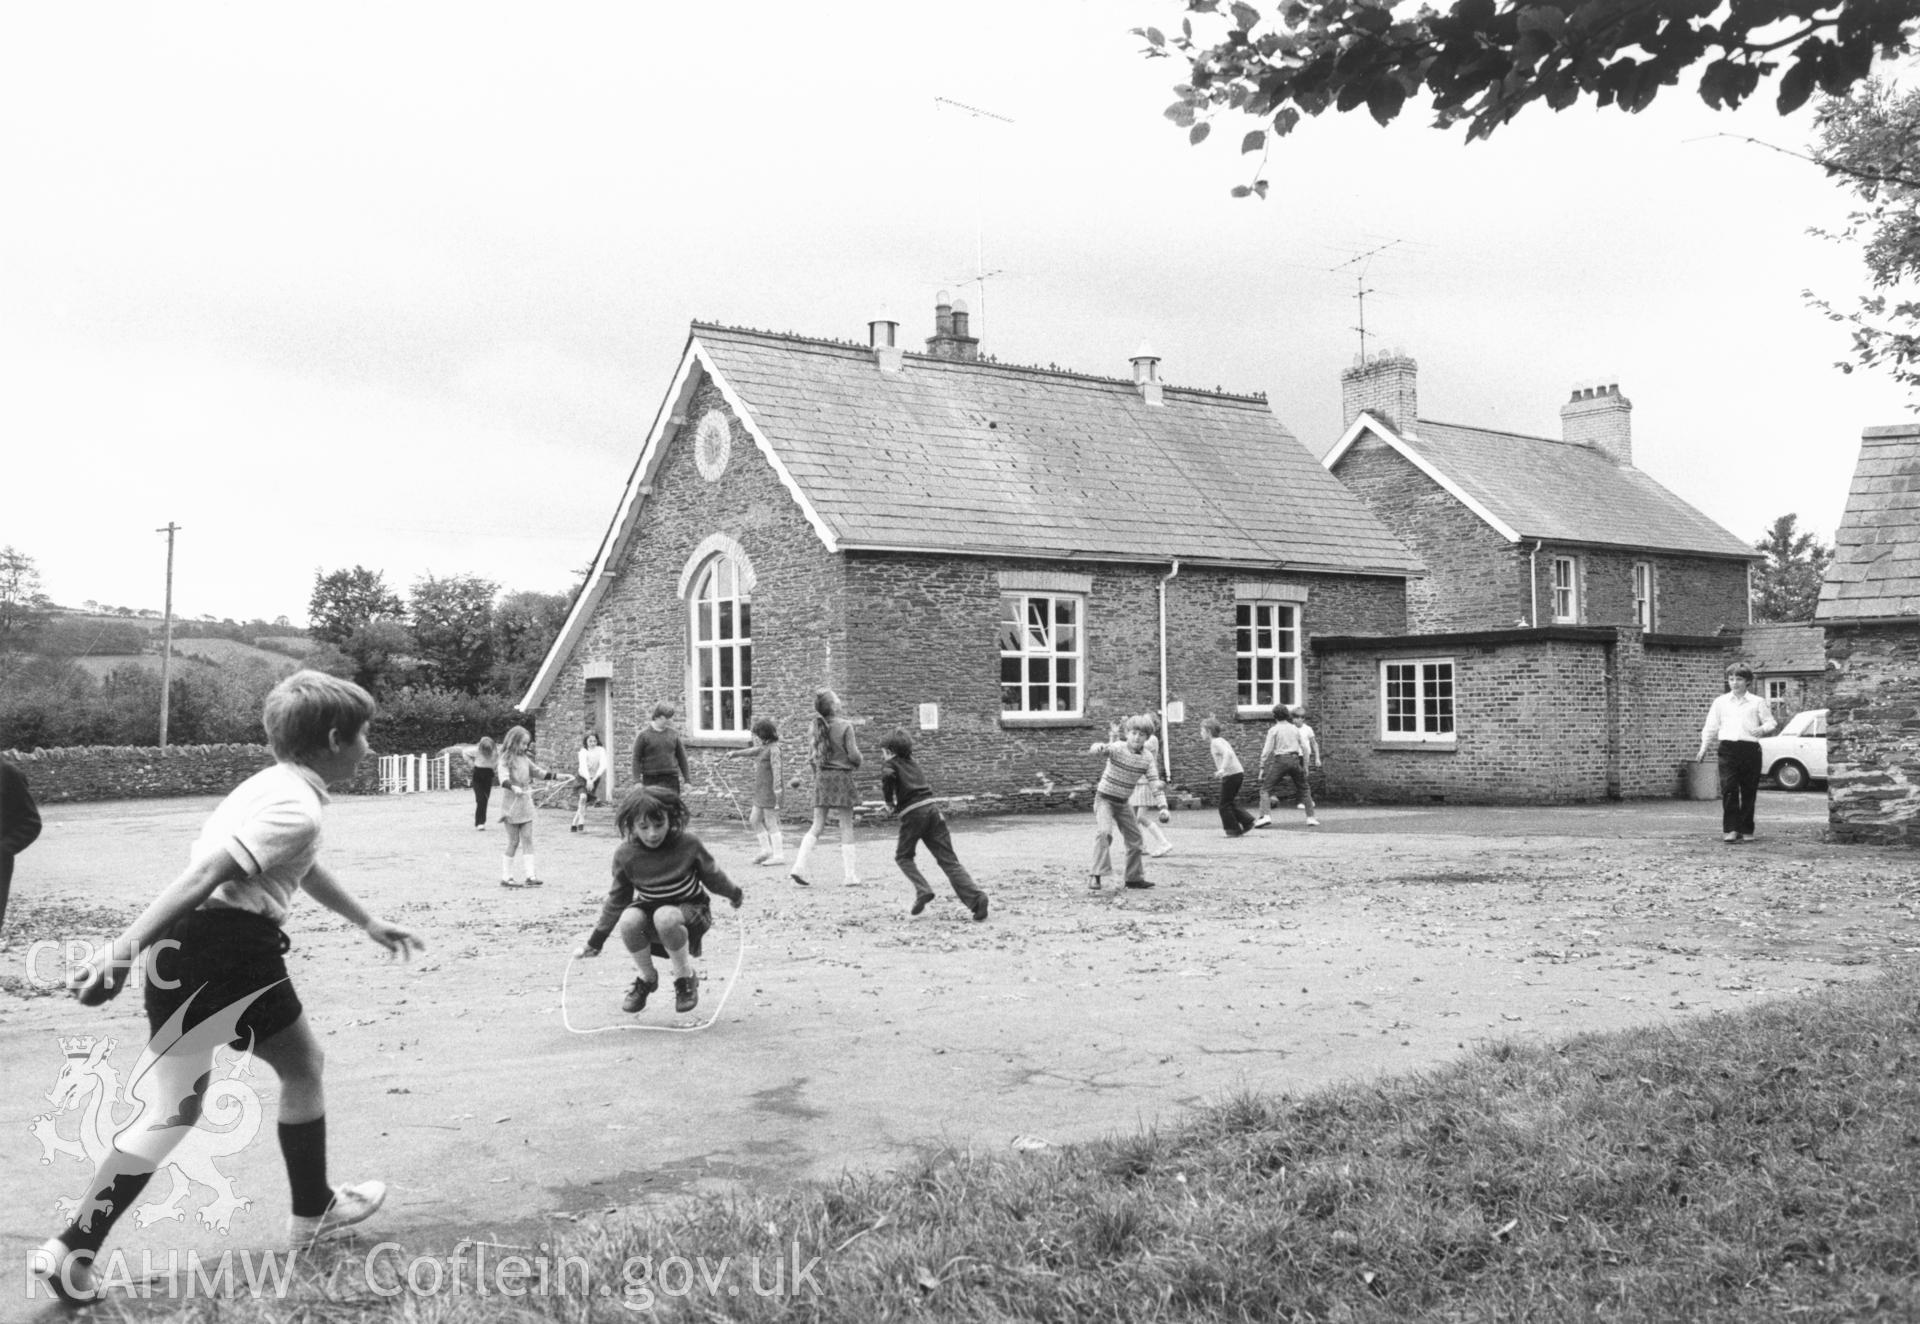 1 b/w print showing exterior view of the primary school, Llangybi (Monmouthshire) with children playing; collated by the former Central Office of Information.